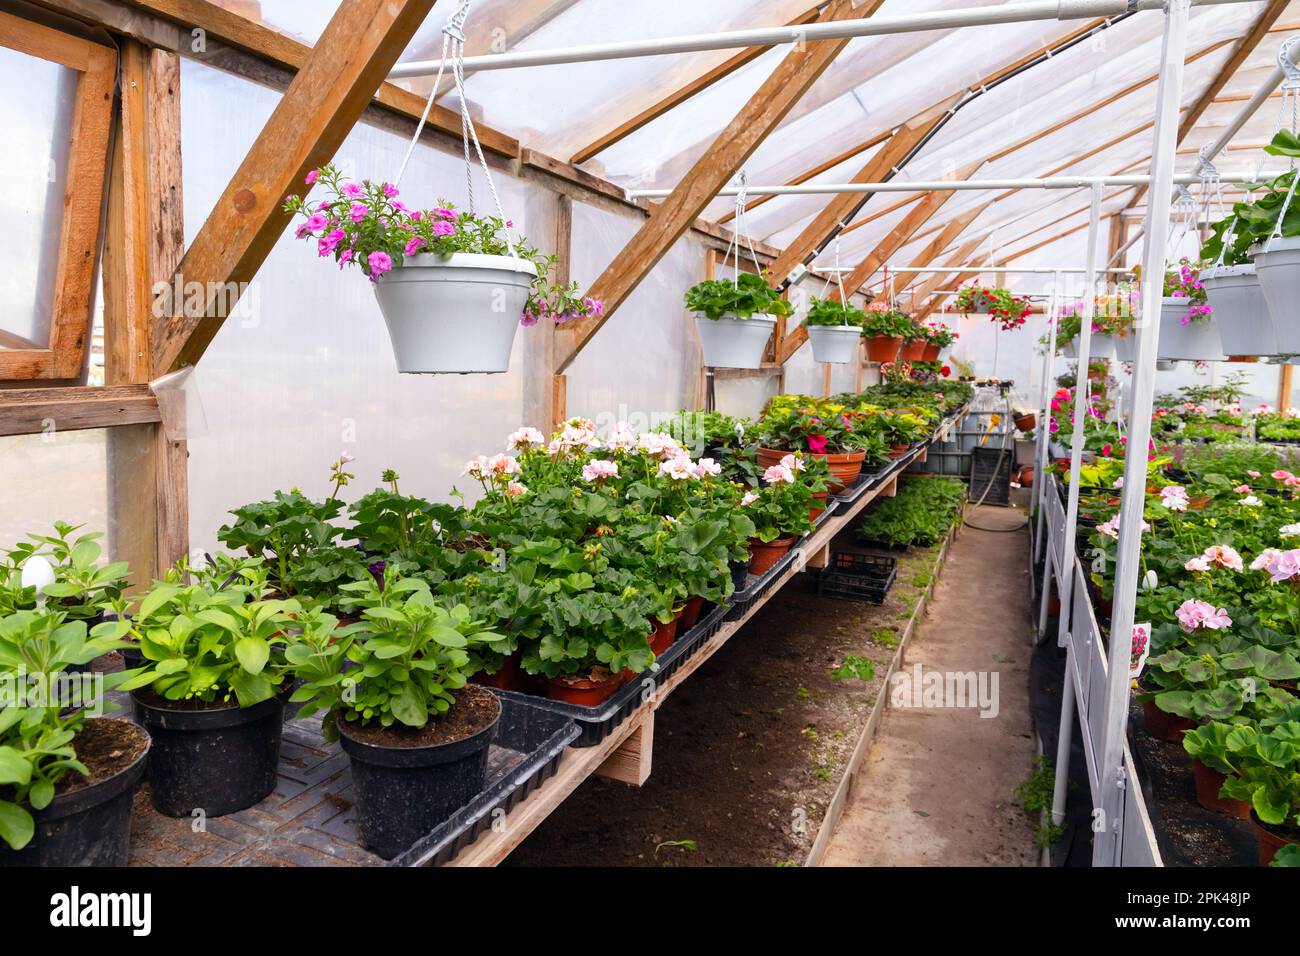 Greenhouse interior full of potted flowers for sale, agriculture photo background Stock Photo